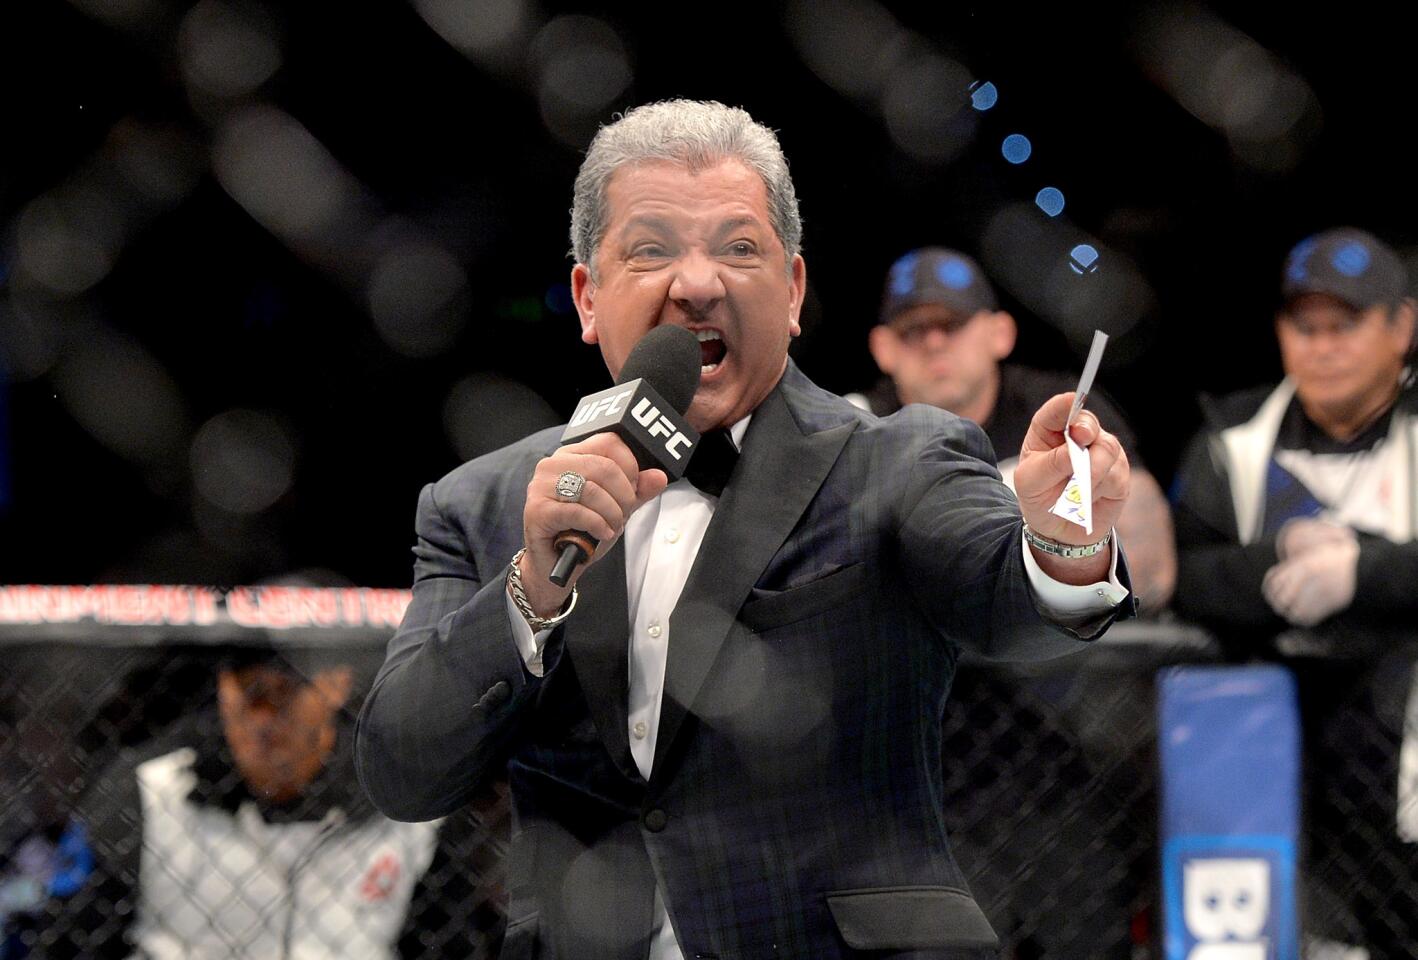 BRISBANE, AUSTRALIA - MARCH 20: UFC fight announcer Bruce Buffer introduces the fighters before the UFC Heavyweight Bout between Mark Hunt and Frank Mir at UFC Brisbane on March 20, 2016 in Brisbane, Australia. (Photo by Bradley Kanaris/Getty Images) ** OUTS - ELSENT, FPG, CM - OUTS * NM, PH, VA if sourced by CT, LA or MoD **